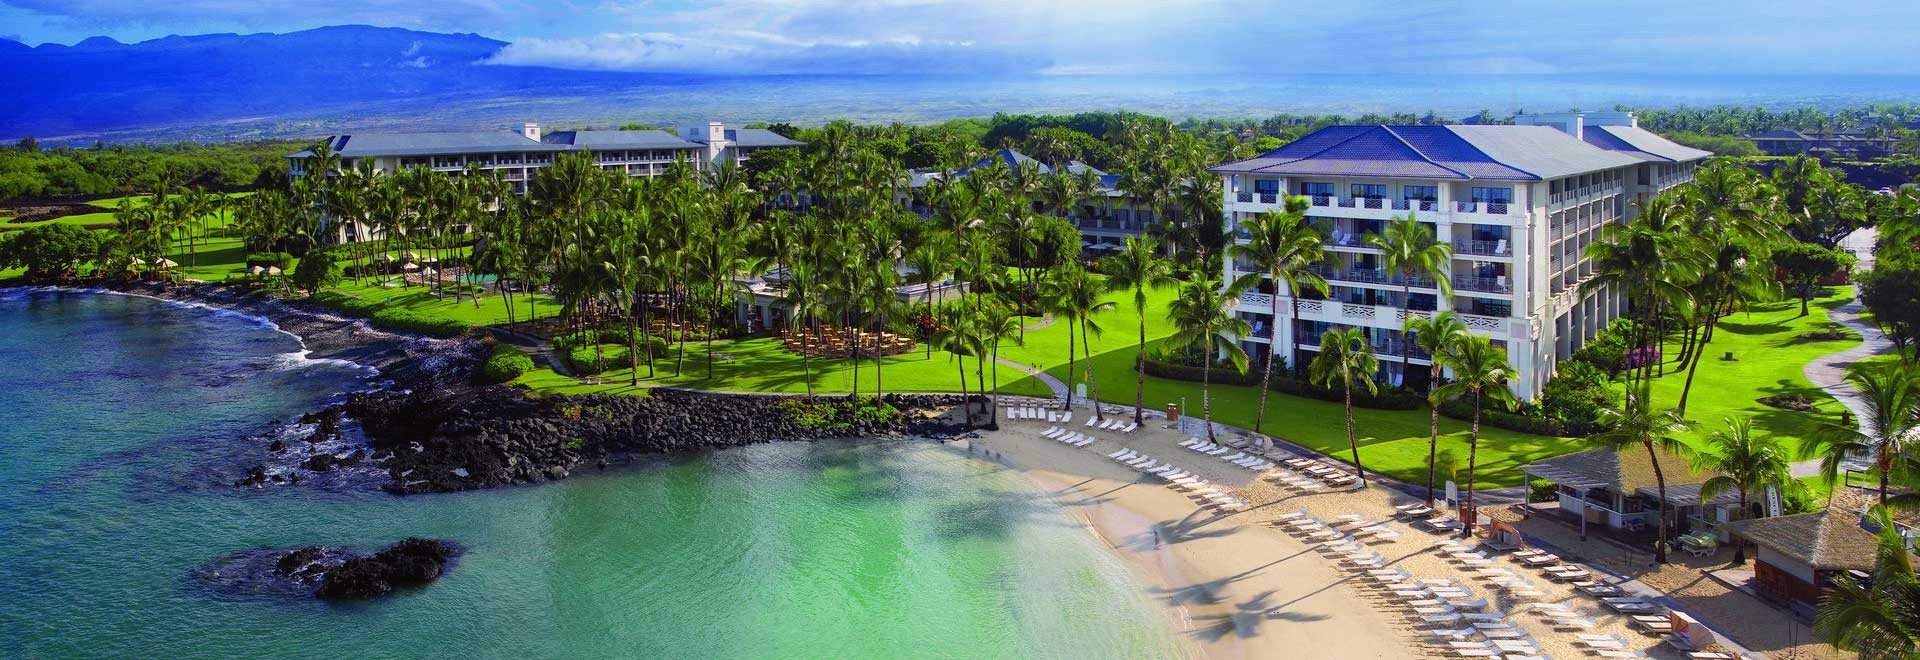 The Fairmont Orchid, Hawaii - Book. Travel. Play.